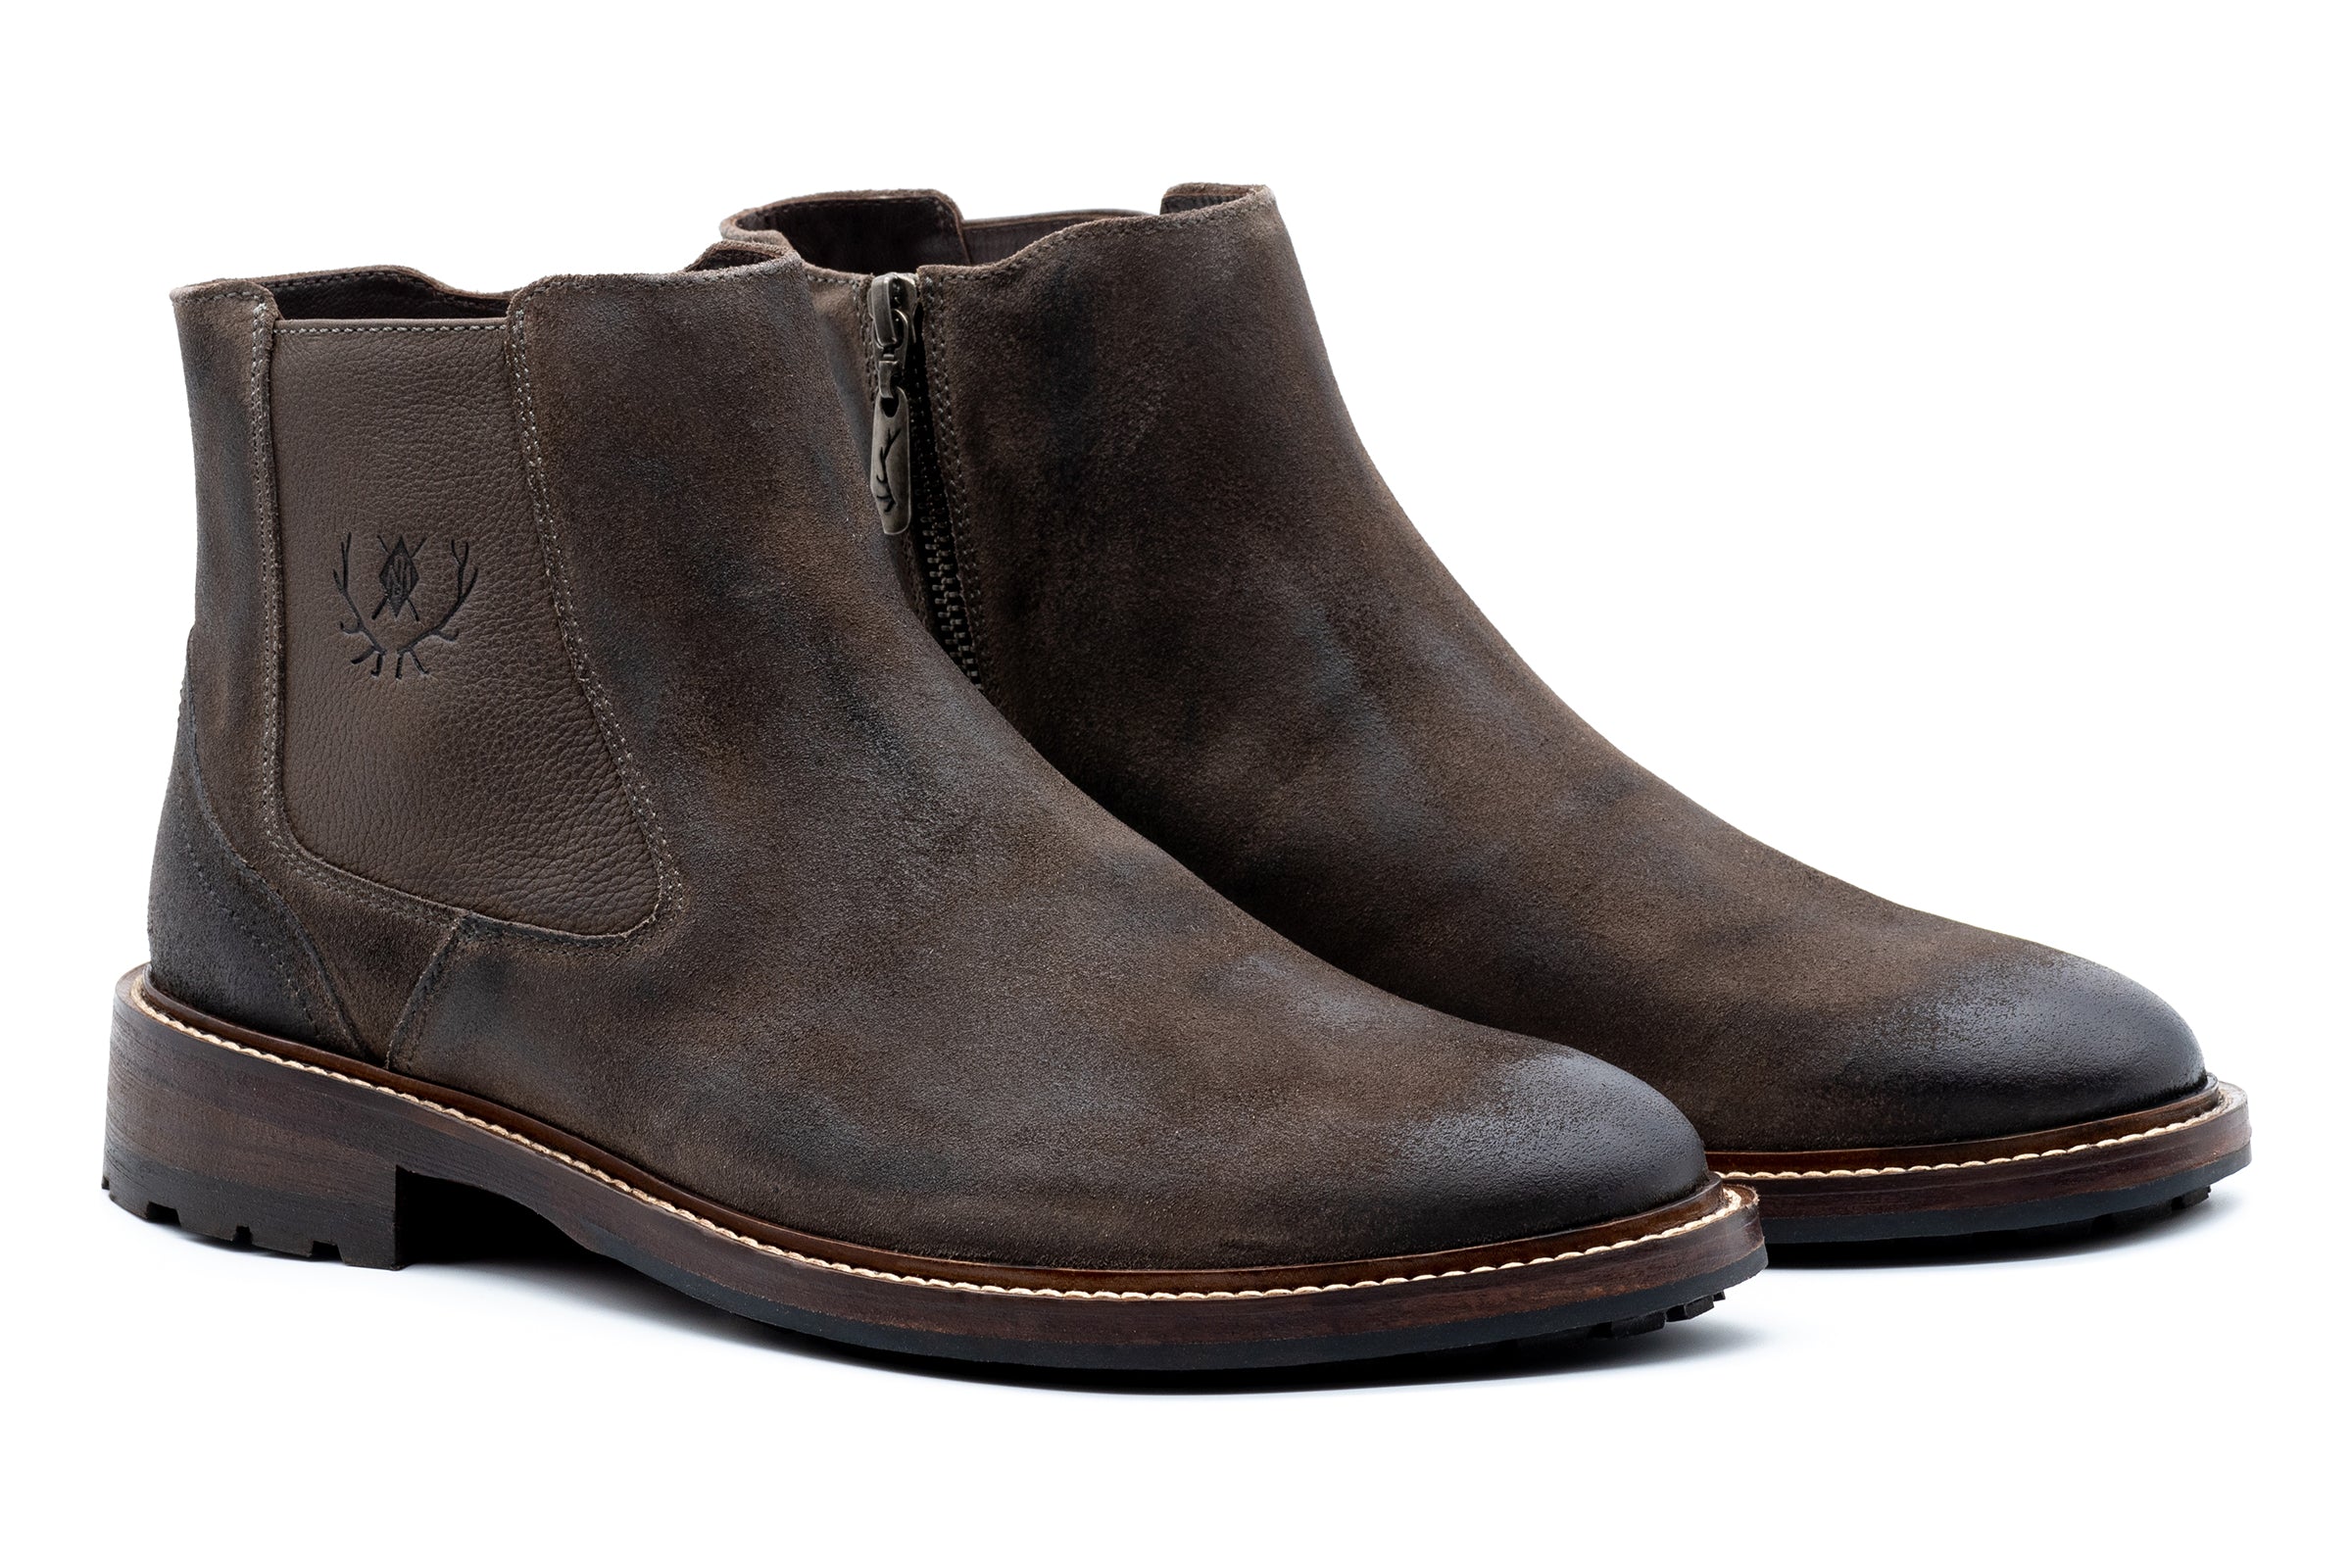 McKinley Suede Boots - Smoke